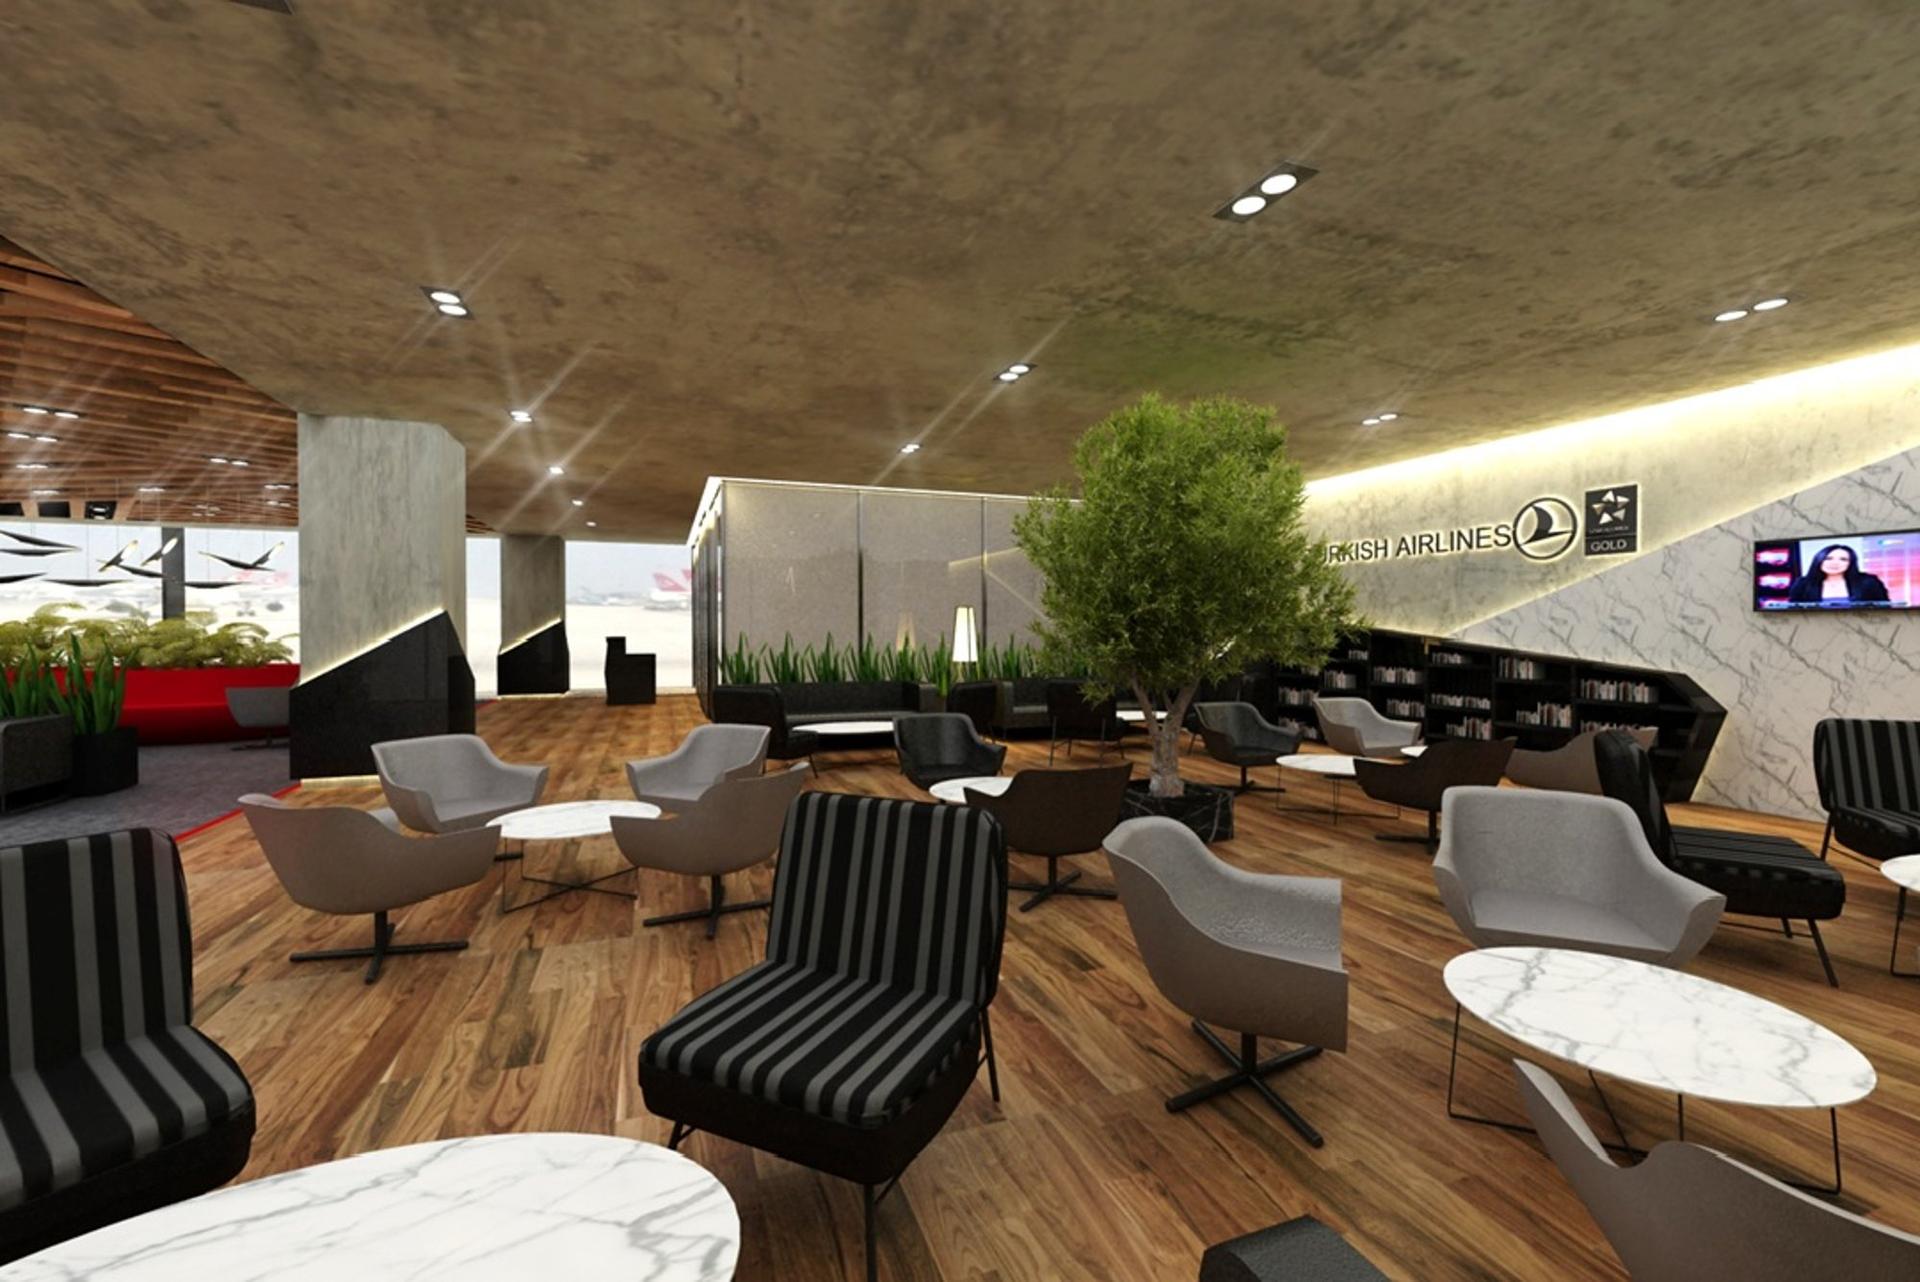 Turkish Airlines CIP Lounge (Business Lounge) image 20 of 27